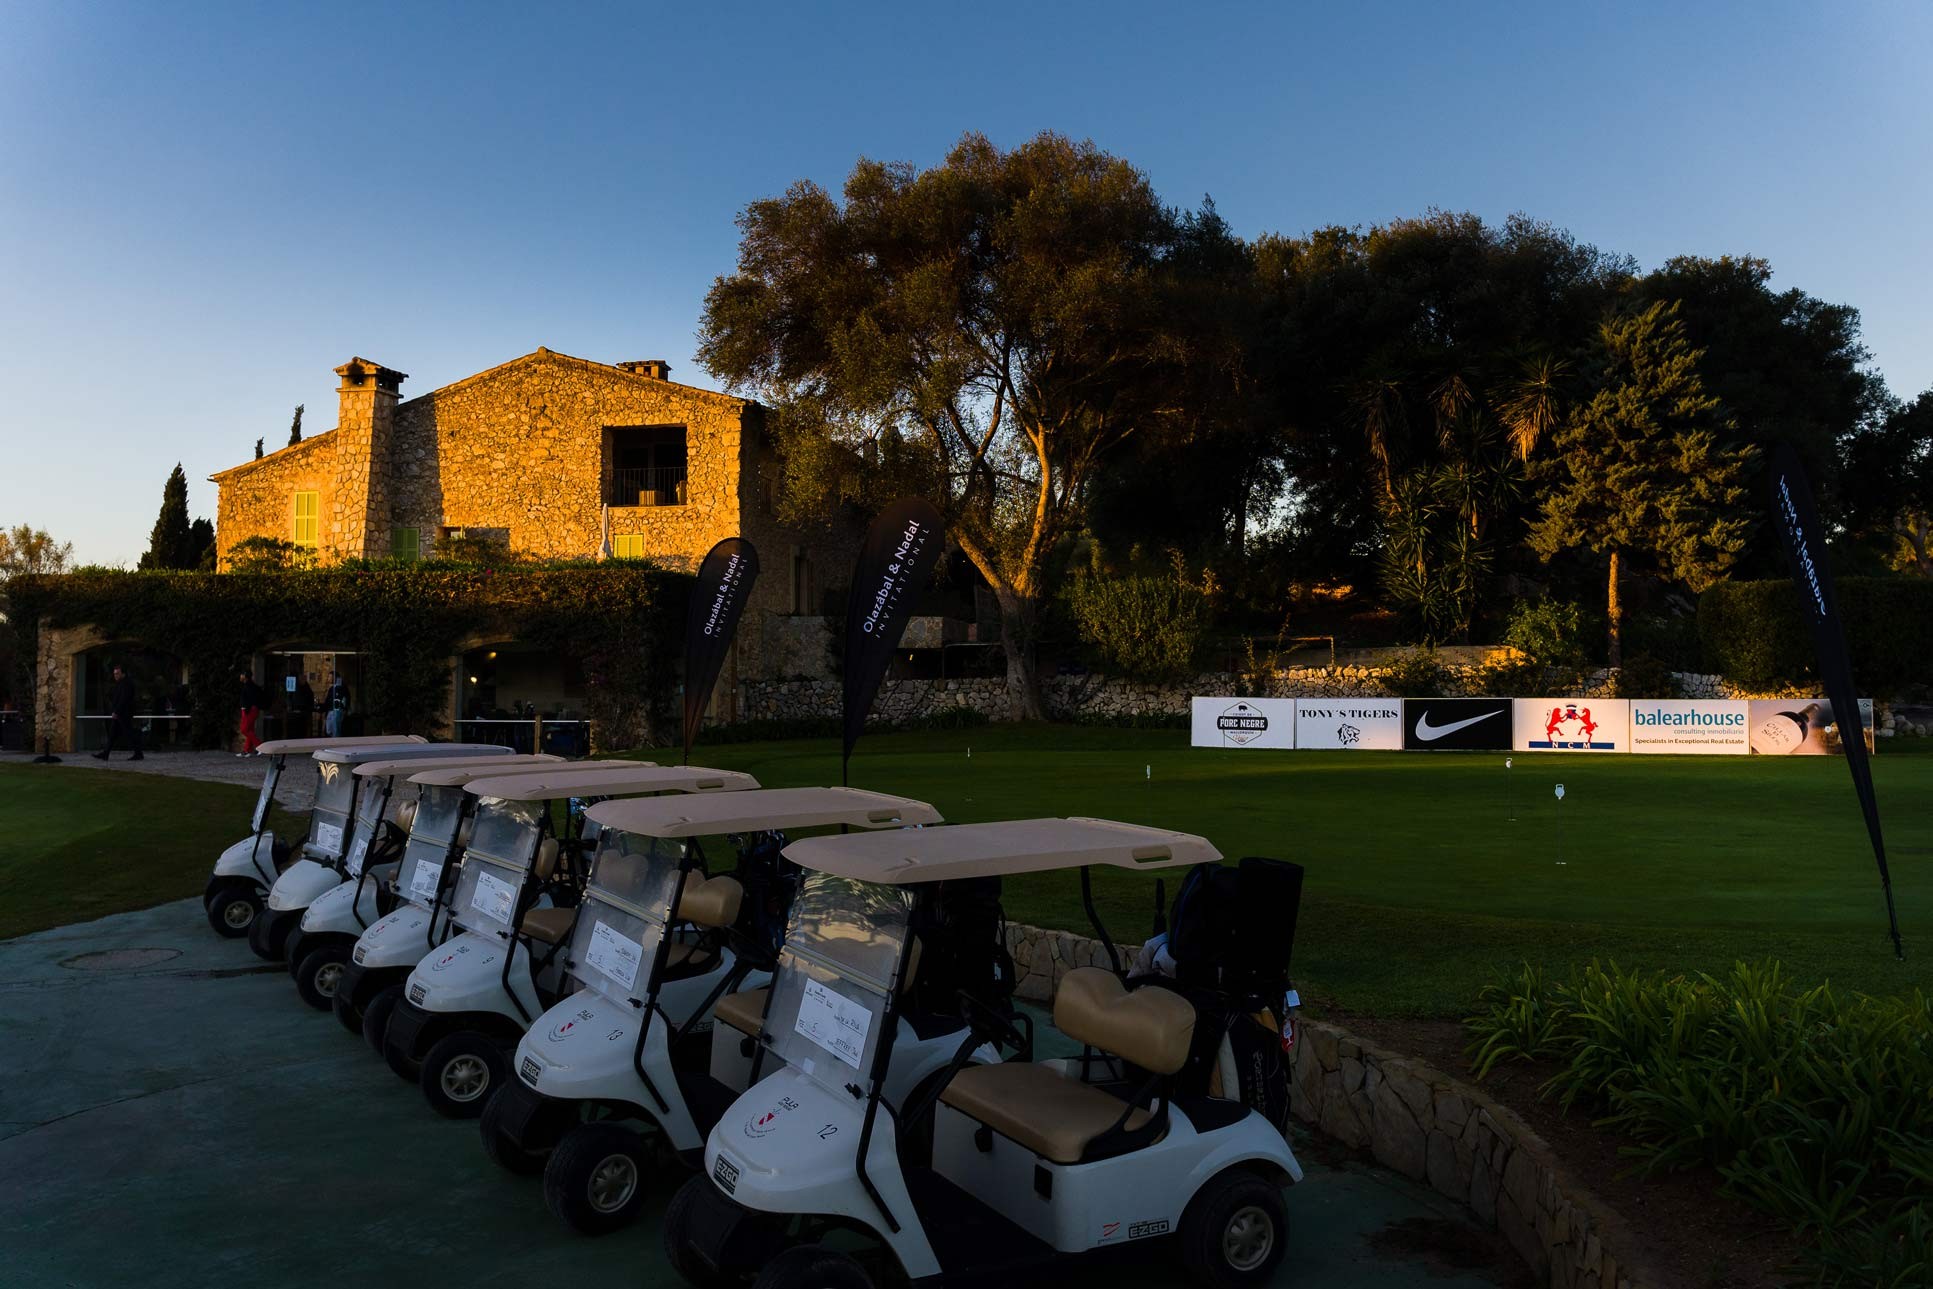 Balearhouse joined the VI edition of the Olazábal & Nadal Golf Tournament by Pula Golf Resort, where sport and gastronomy came together for a worthy cause.